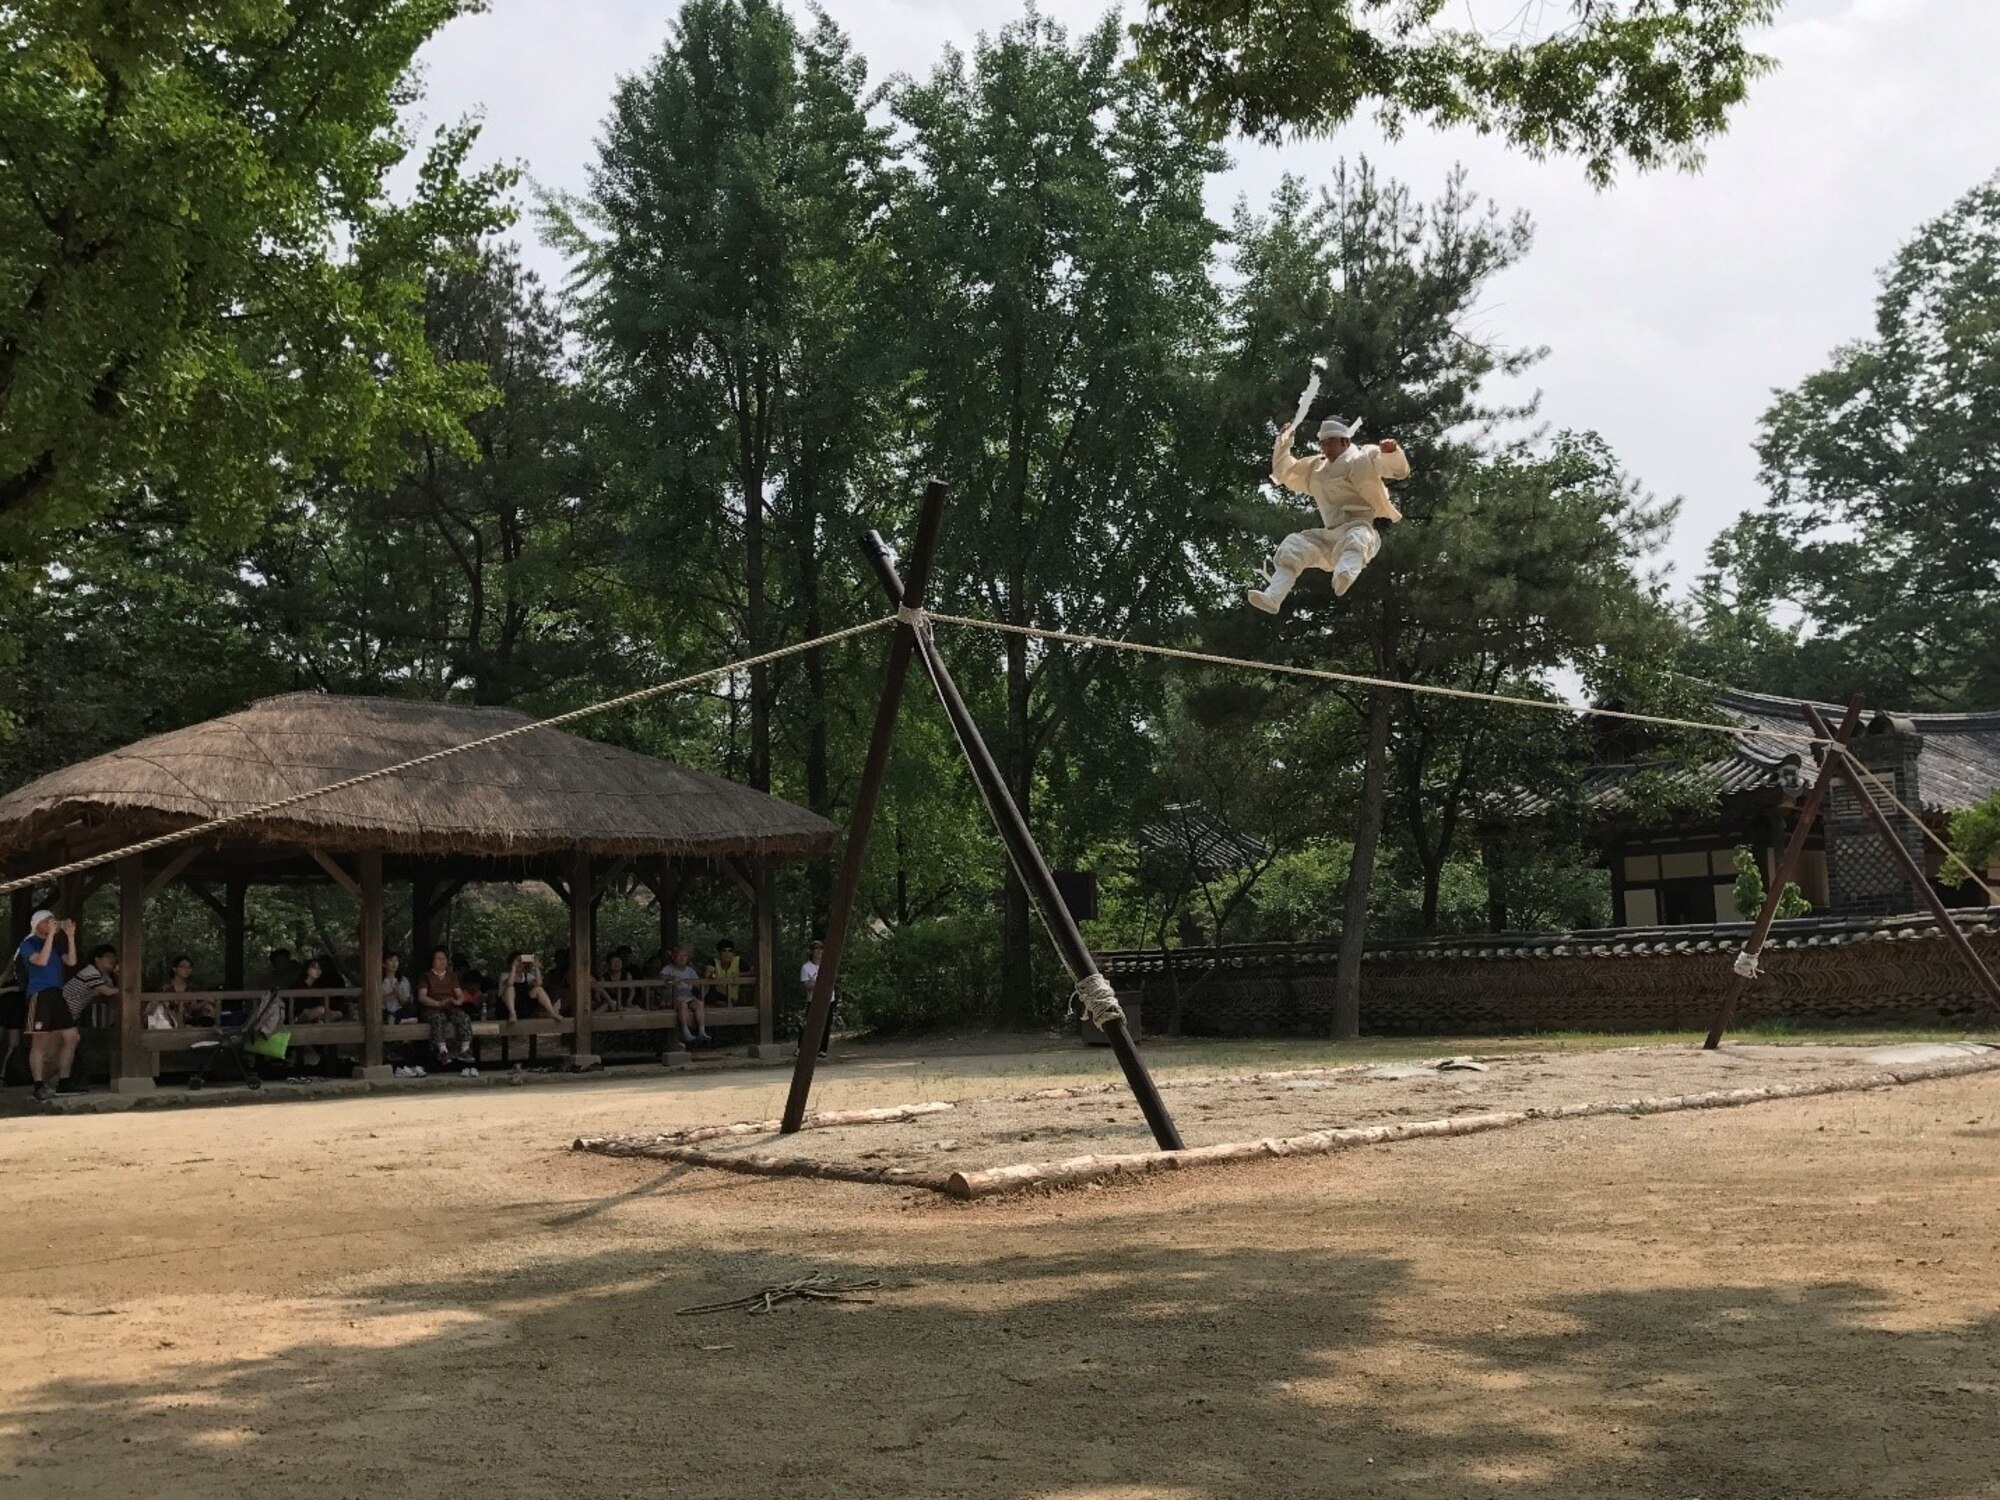 An acrobat performs a tightrope walking routine at the Korean Folk Village in Yongin, Republic of Korea, July 20, 2017. The Korean Folk Village hosts performances of traditional art forms from the Joseon Dynasty period to connect the past to the present. Nearly 100 United States Forces Korea members were invited by the Ministry of Patriots and Veterans Affairs to tour this location and other historic sites across the ROK as part of an initiative to give U.S. personnel a better understanding of Korean culture and patriotism. (U.S. Air Force photo by 1st Lt. Lauren Linscott/Released) 